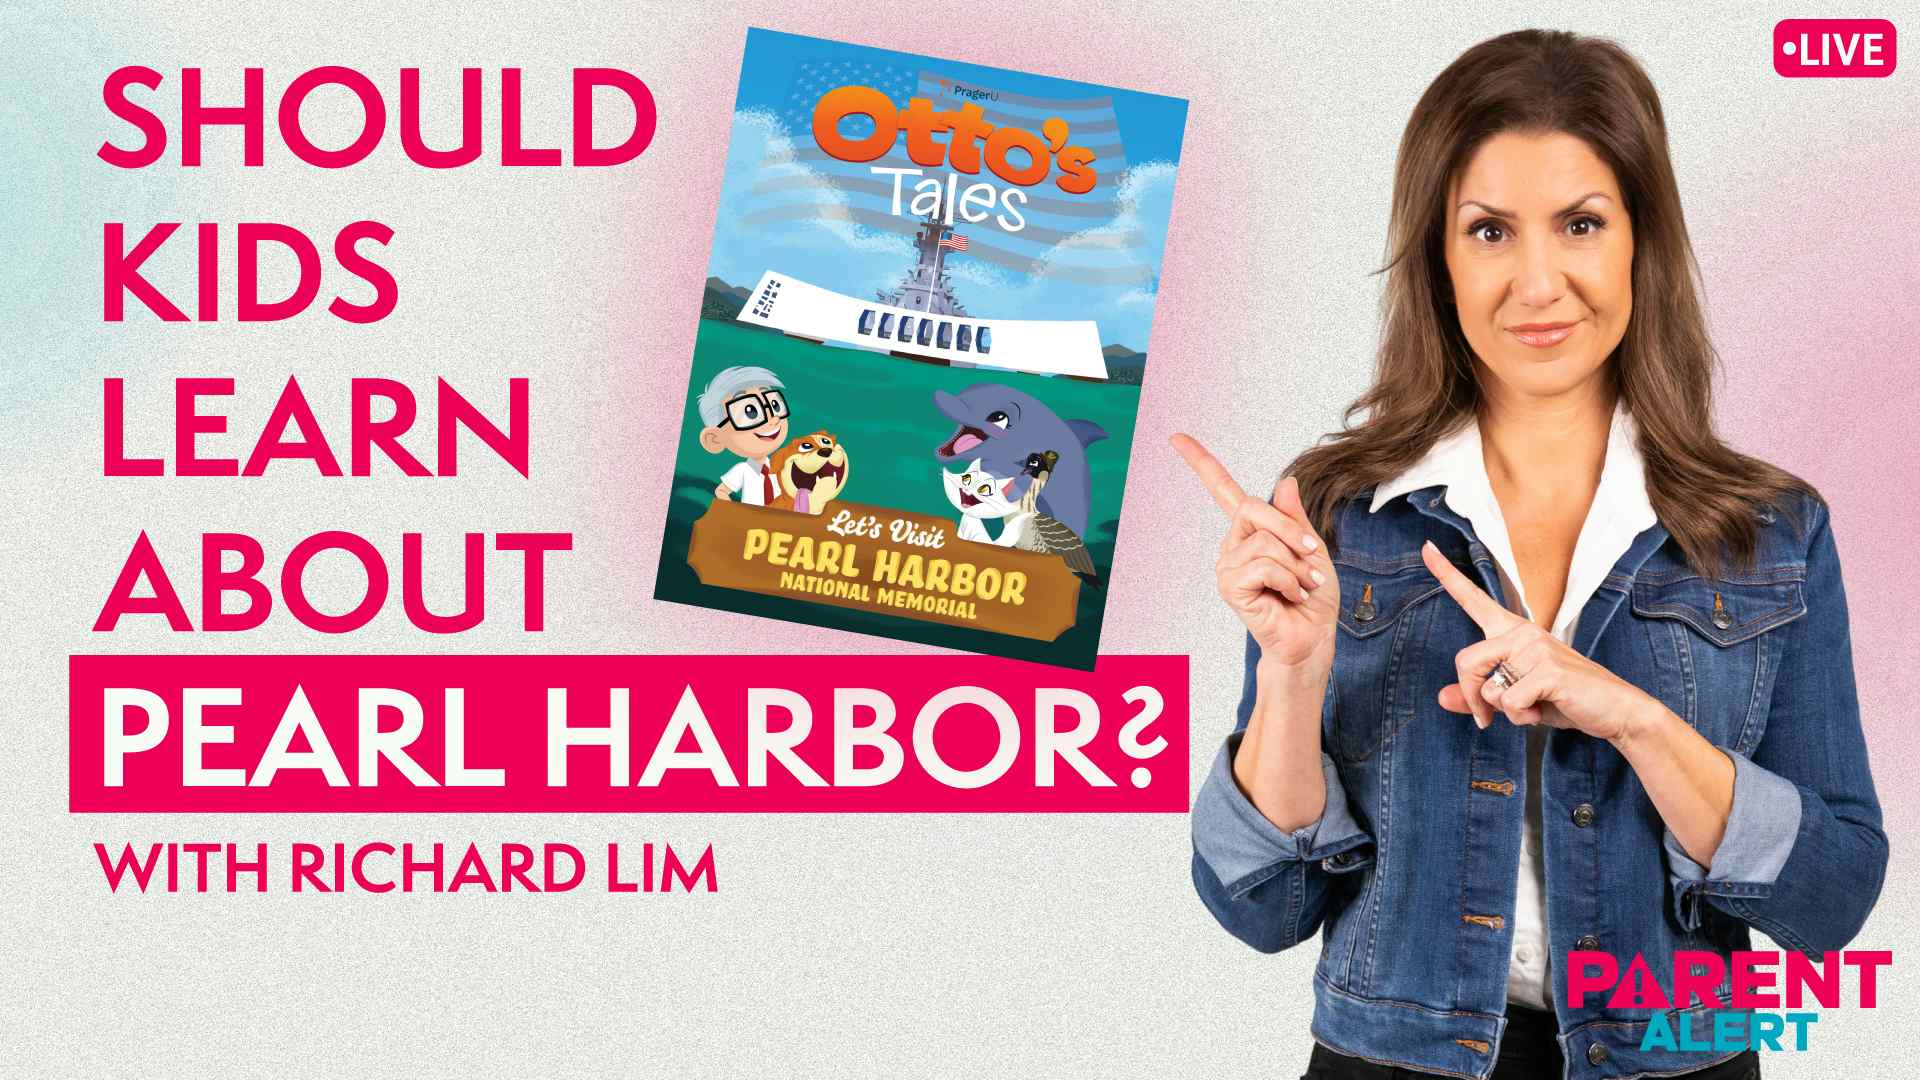 Should Kids Learn about Pearl Harbor?